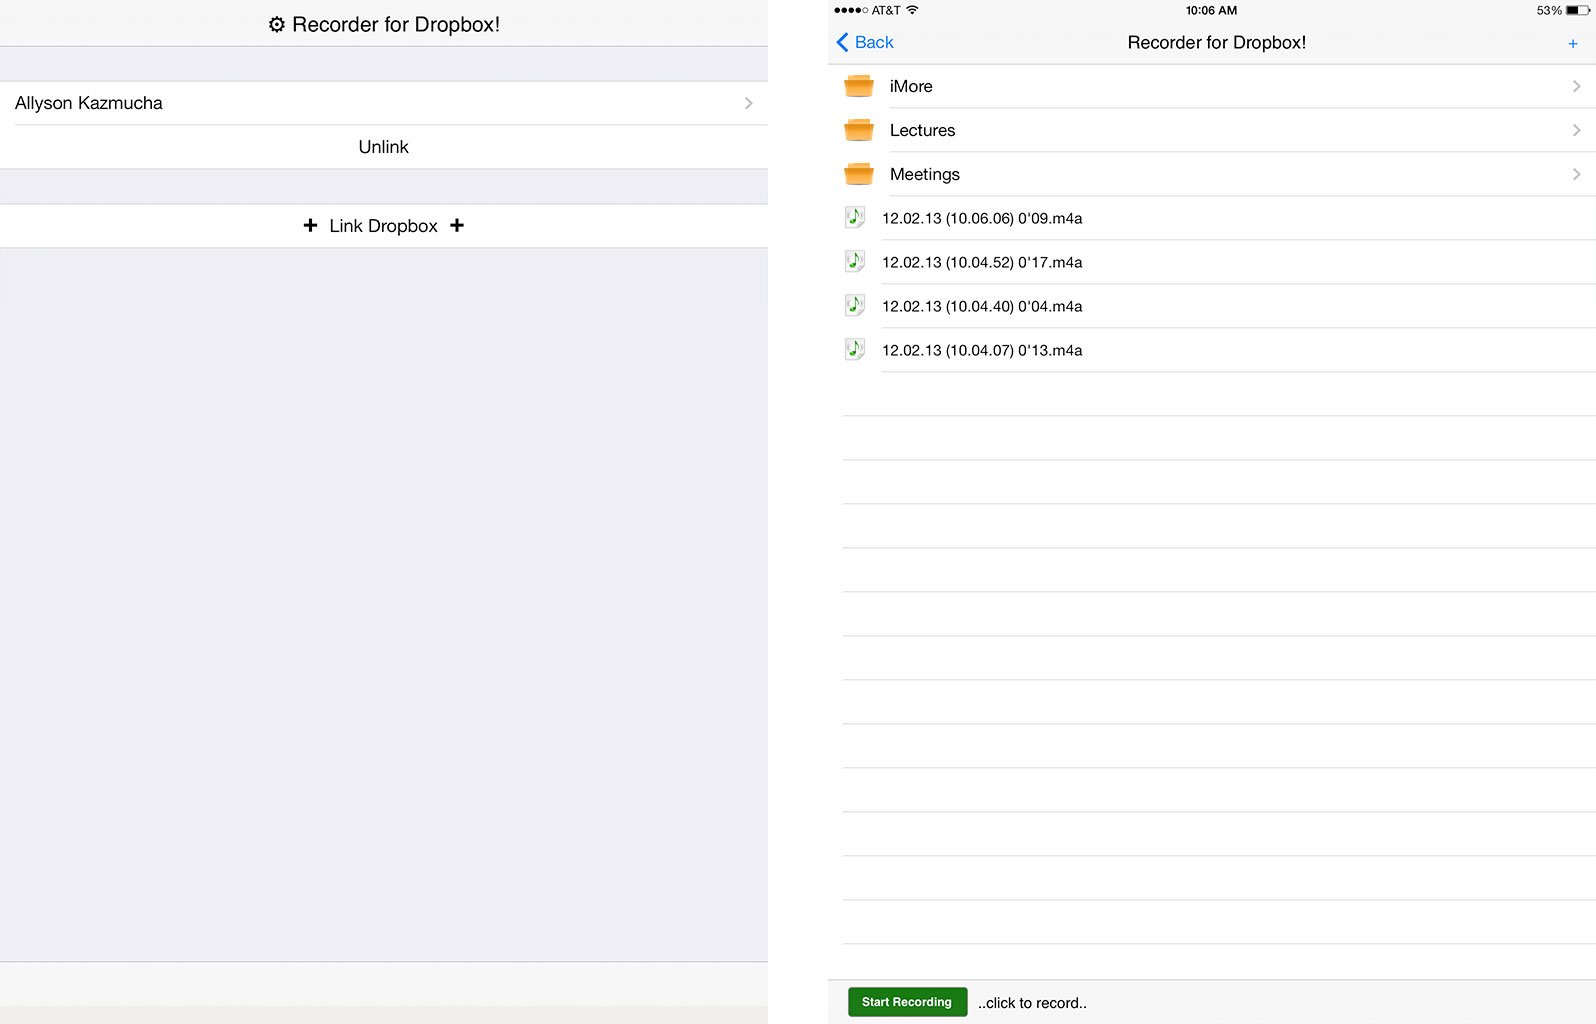 Best voice memo apps for iPad: Recorder for Dropbox